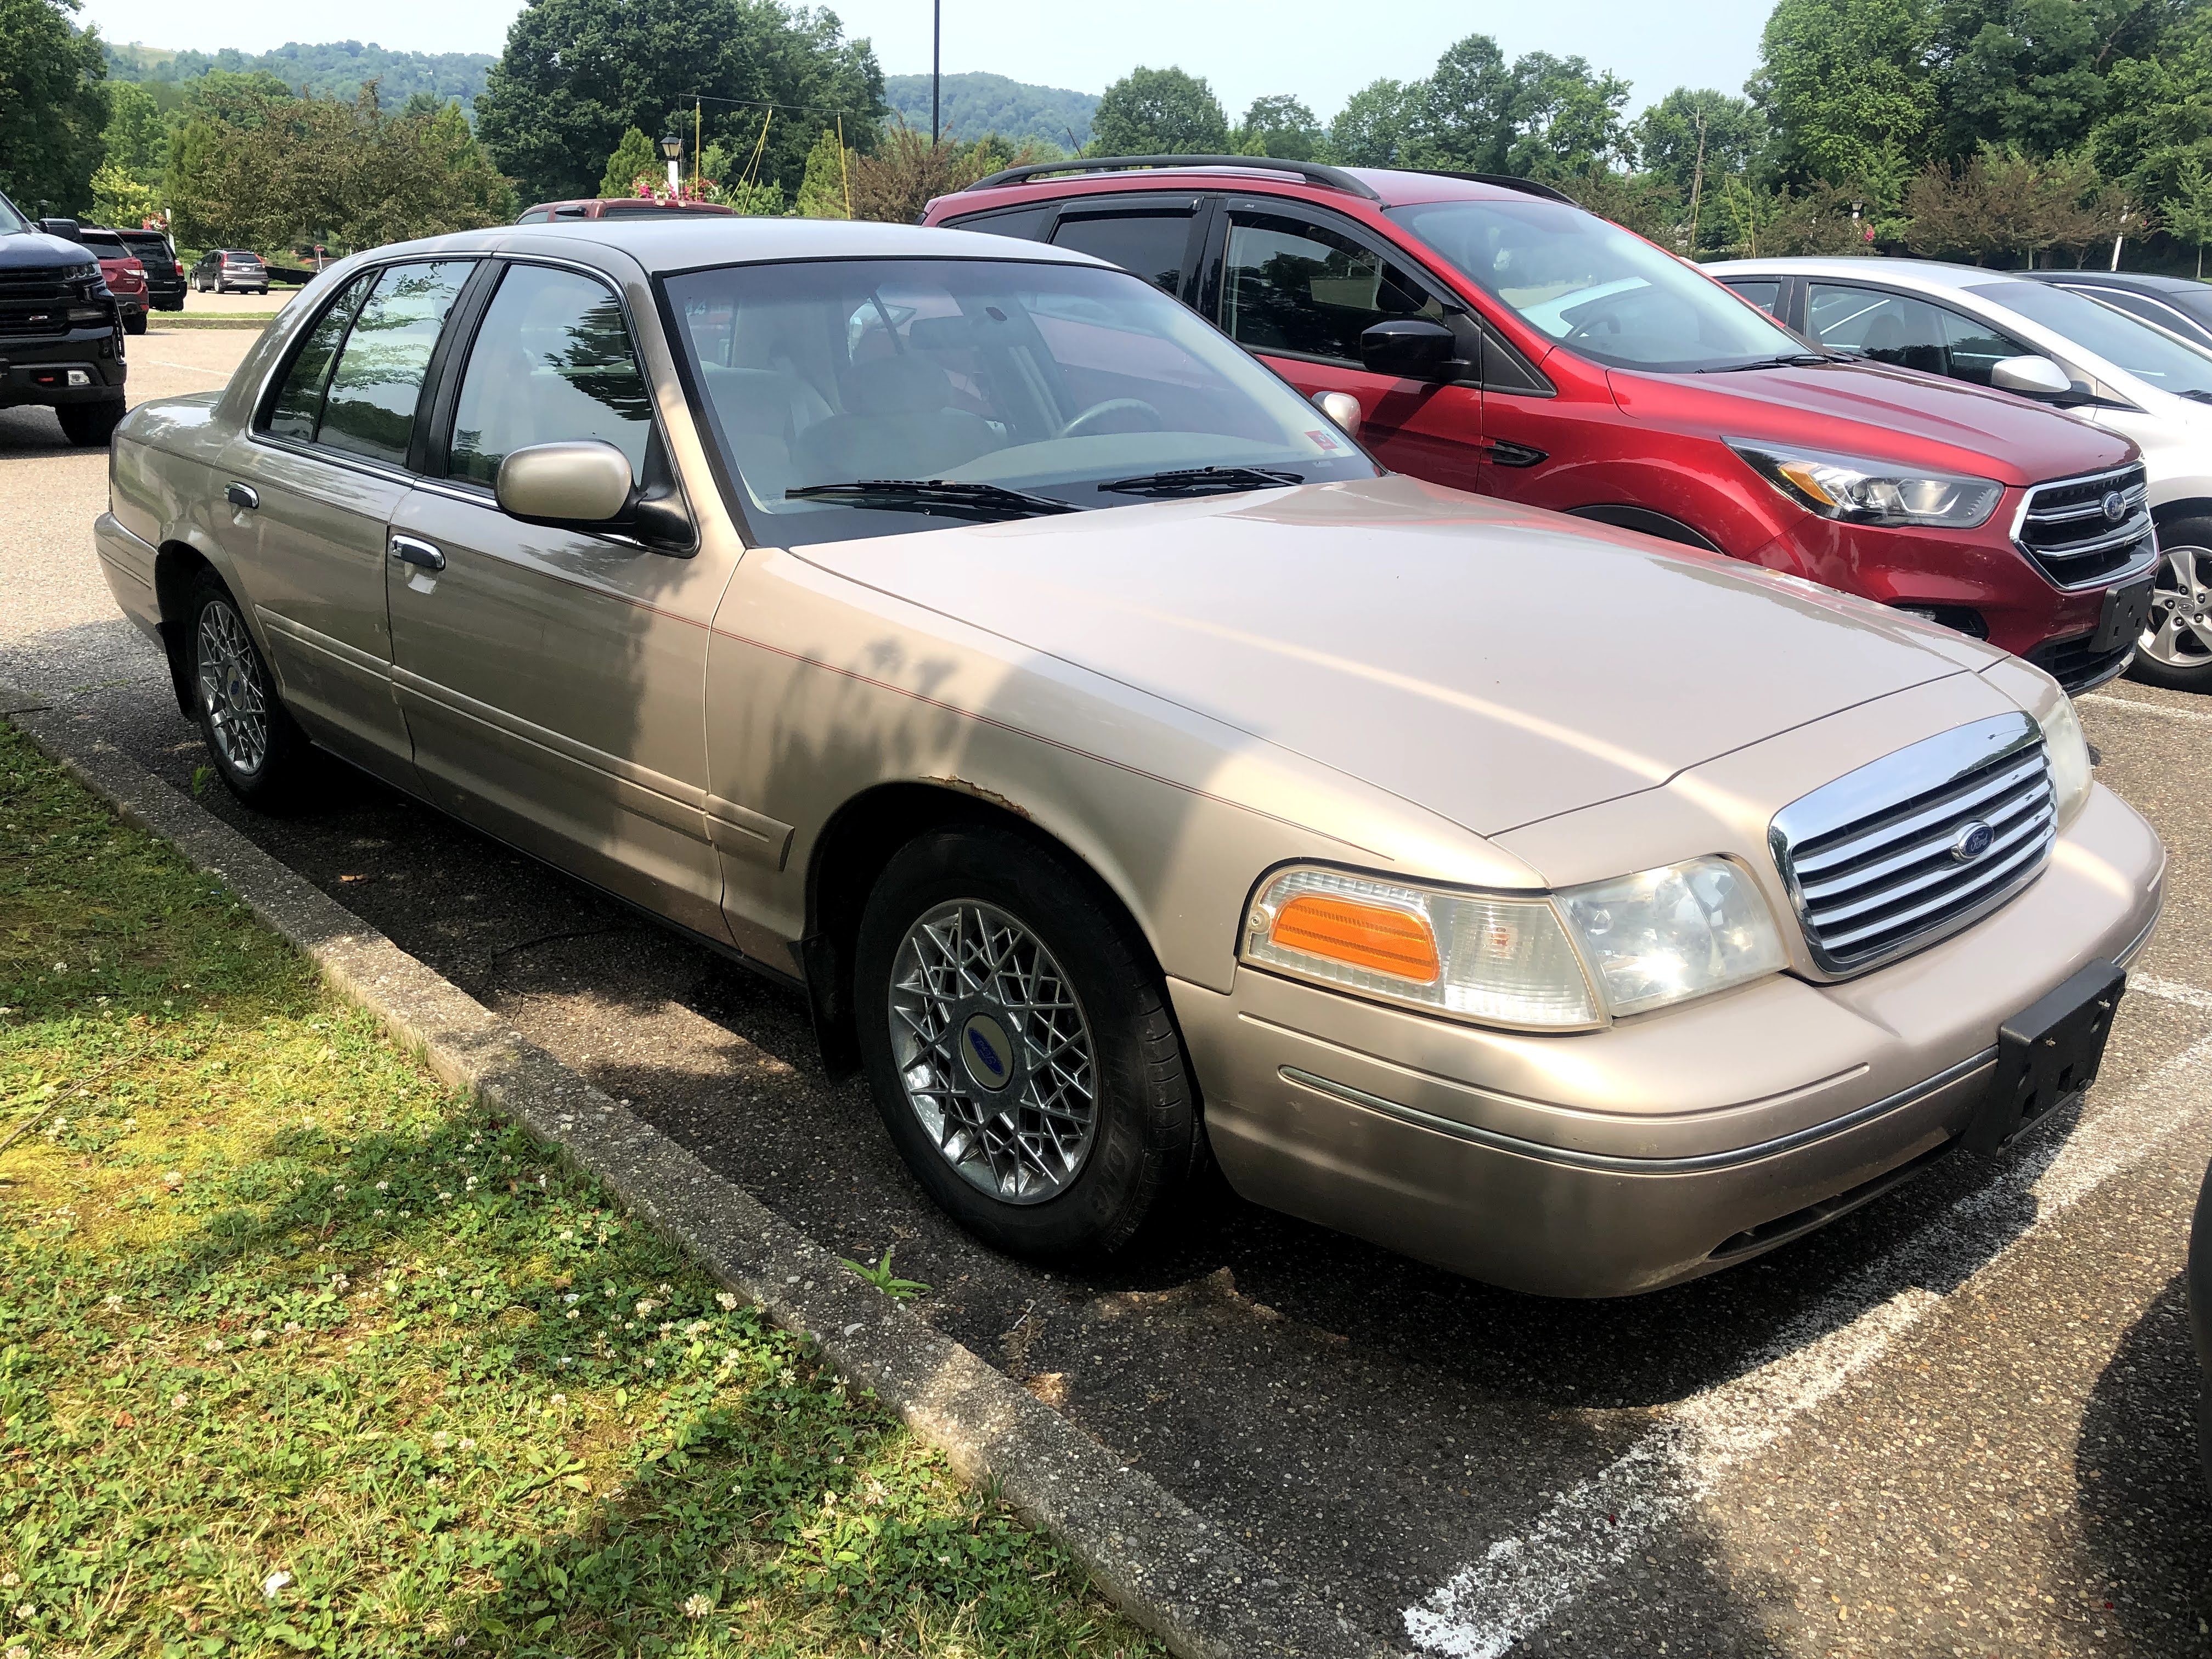 File:1998 Ford Crown Victoria LX in Harvest Gold Metallic, front left,  7-5-2021.jpg - Wikimedia Commons